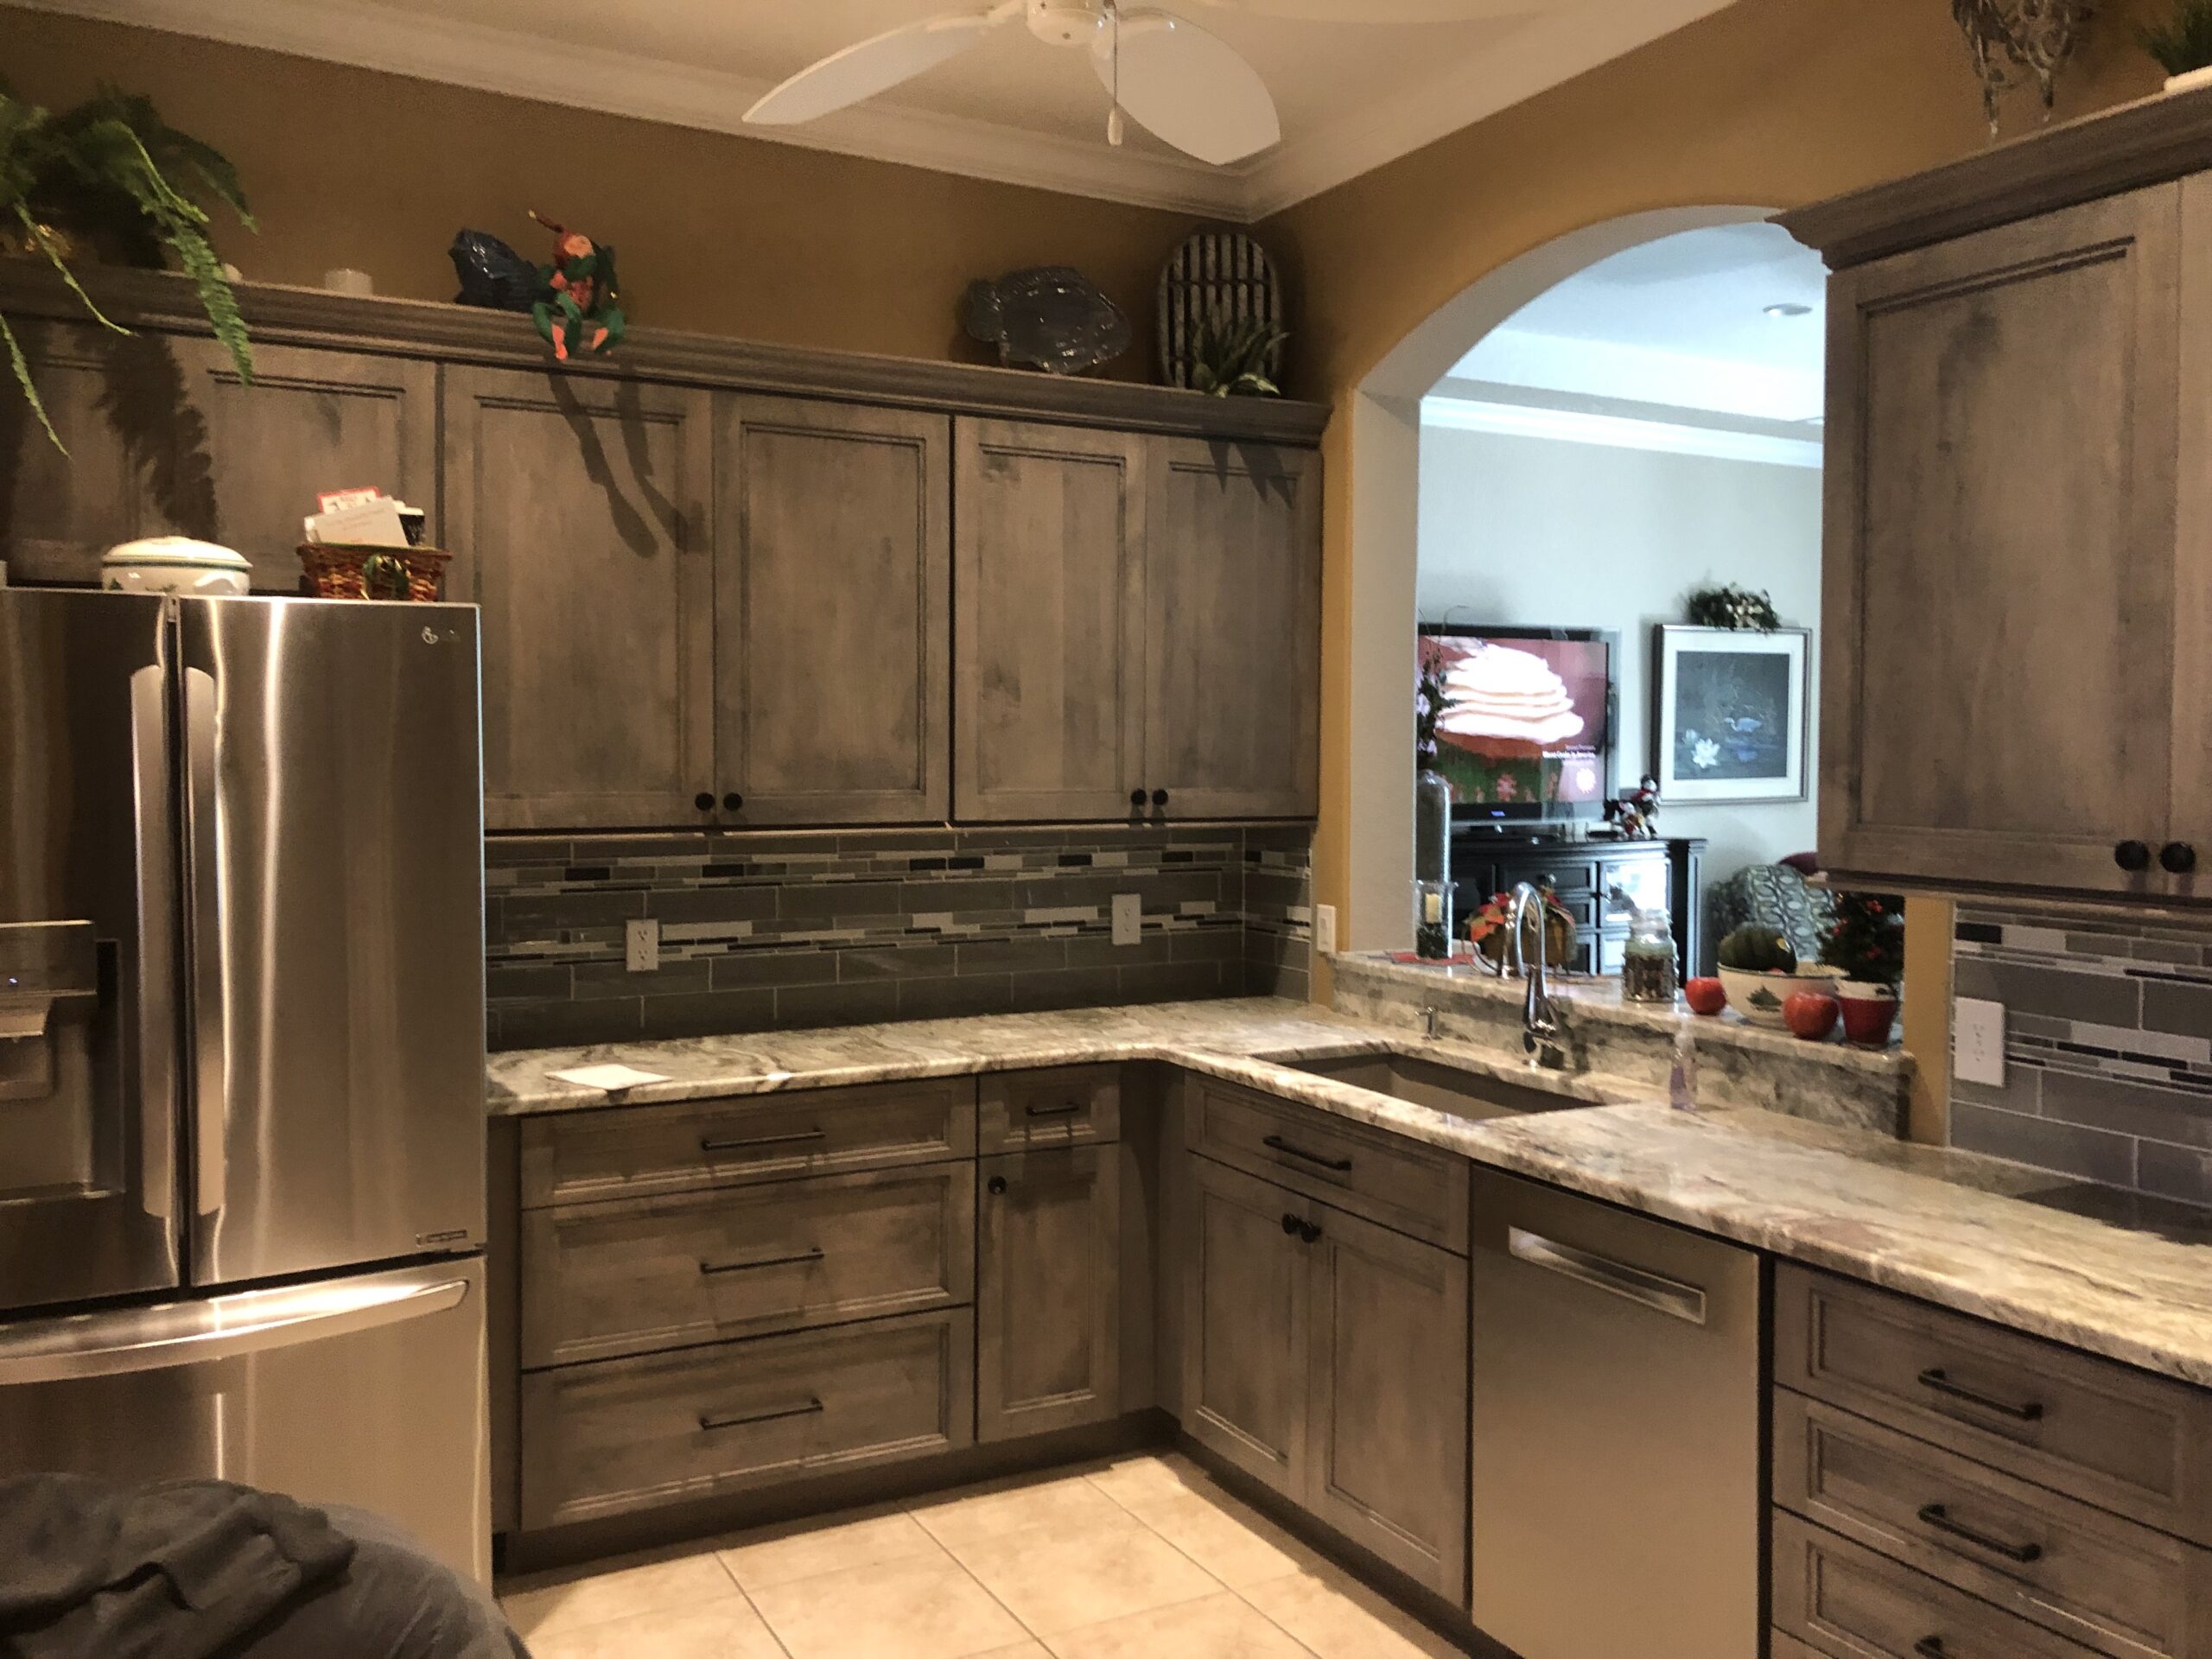 Modern, Stylish, and High Quality Stained Cherry Kitchen Cabinet Refacing in Odessa